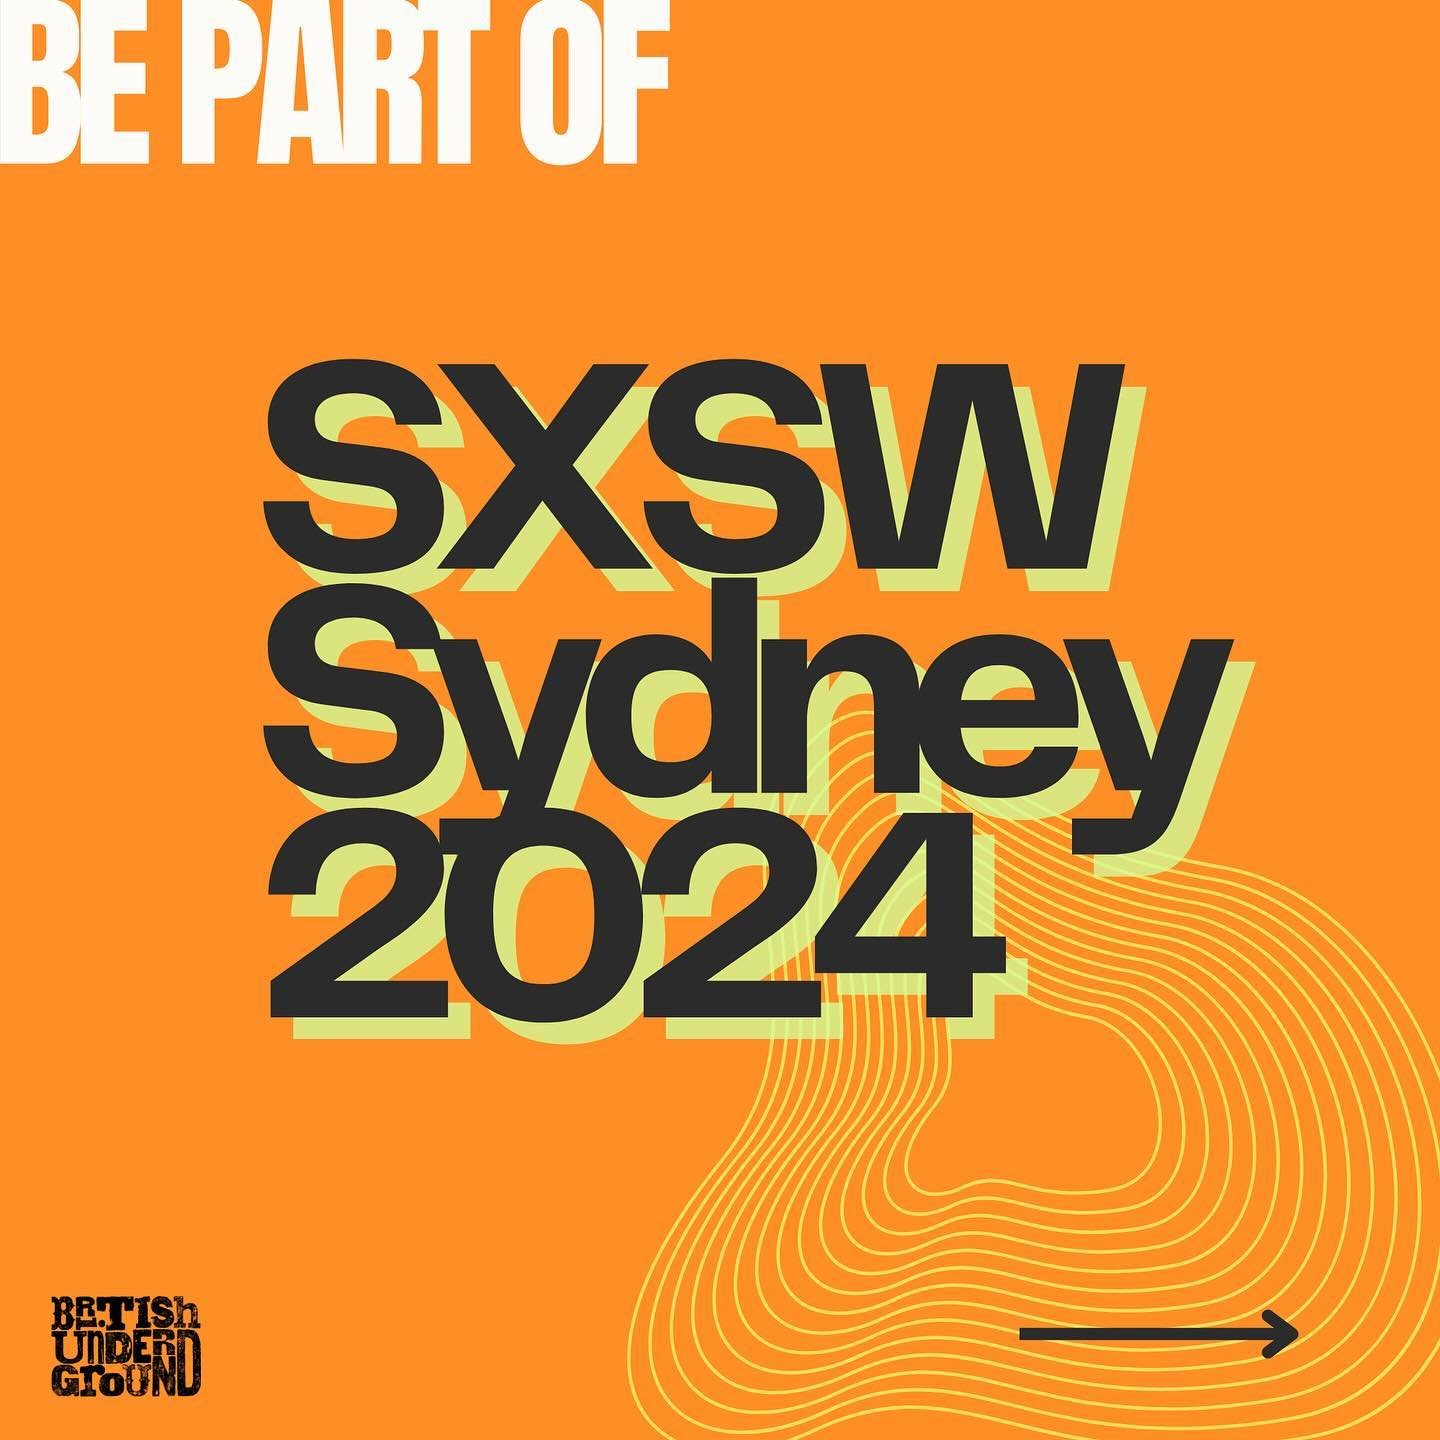 Do you want to showcase at @sxswsydney ? Applications are closing soon 📣

Discover all the ways you can participate at SXSW Sydney &ndash; from performing live music, premiering your film project or proposing topics and panel speakers and much more.